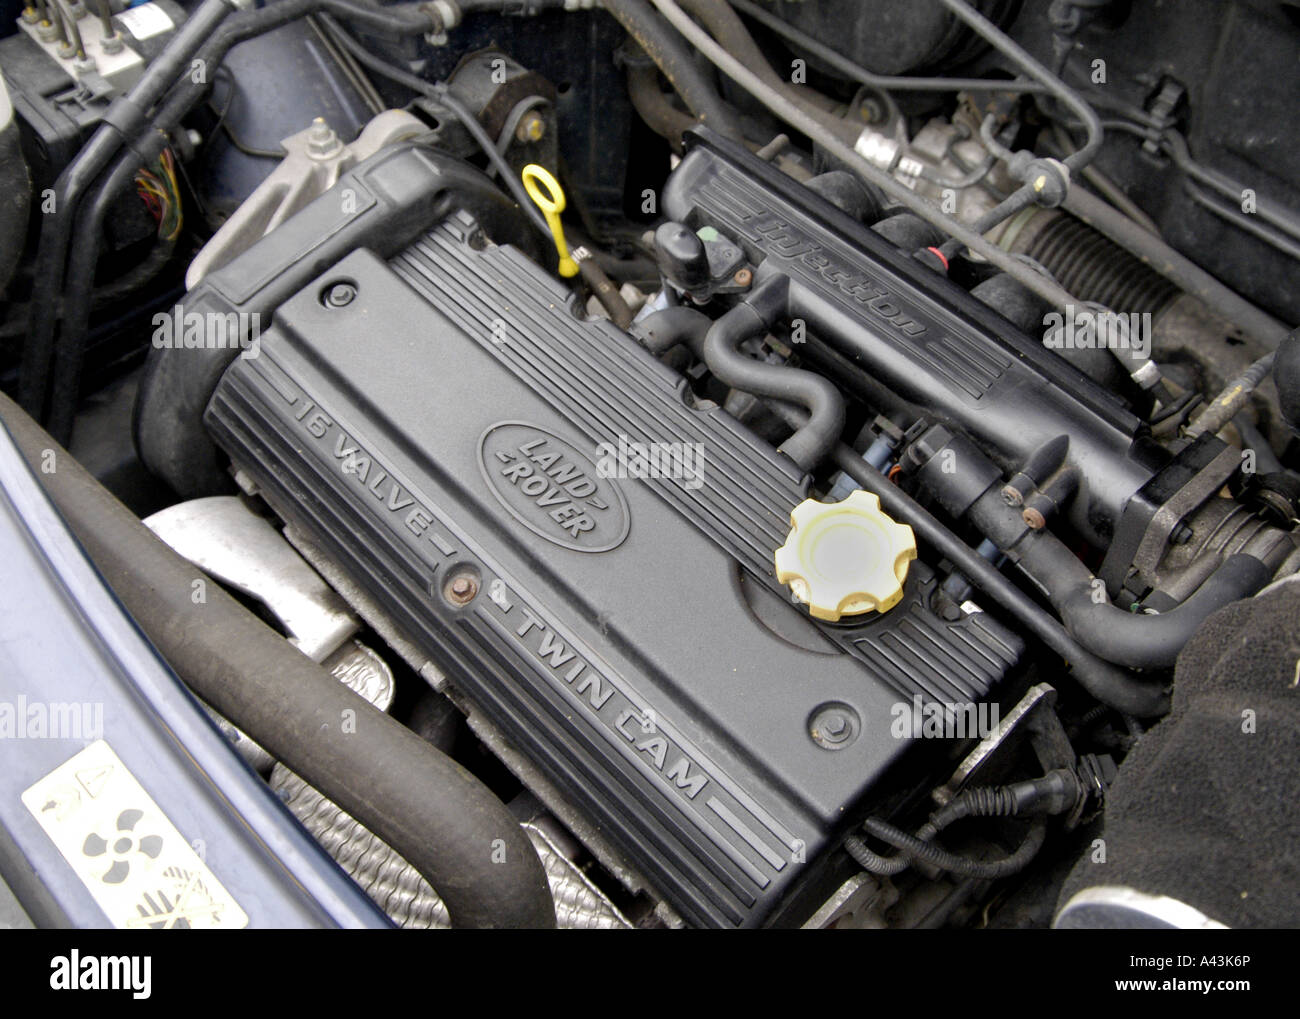 Rover K Series 1.8 litre engine fitted to a Land Rover Freelander transverse mount Stock Photo